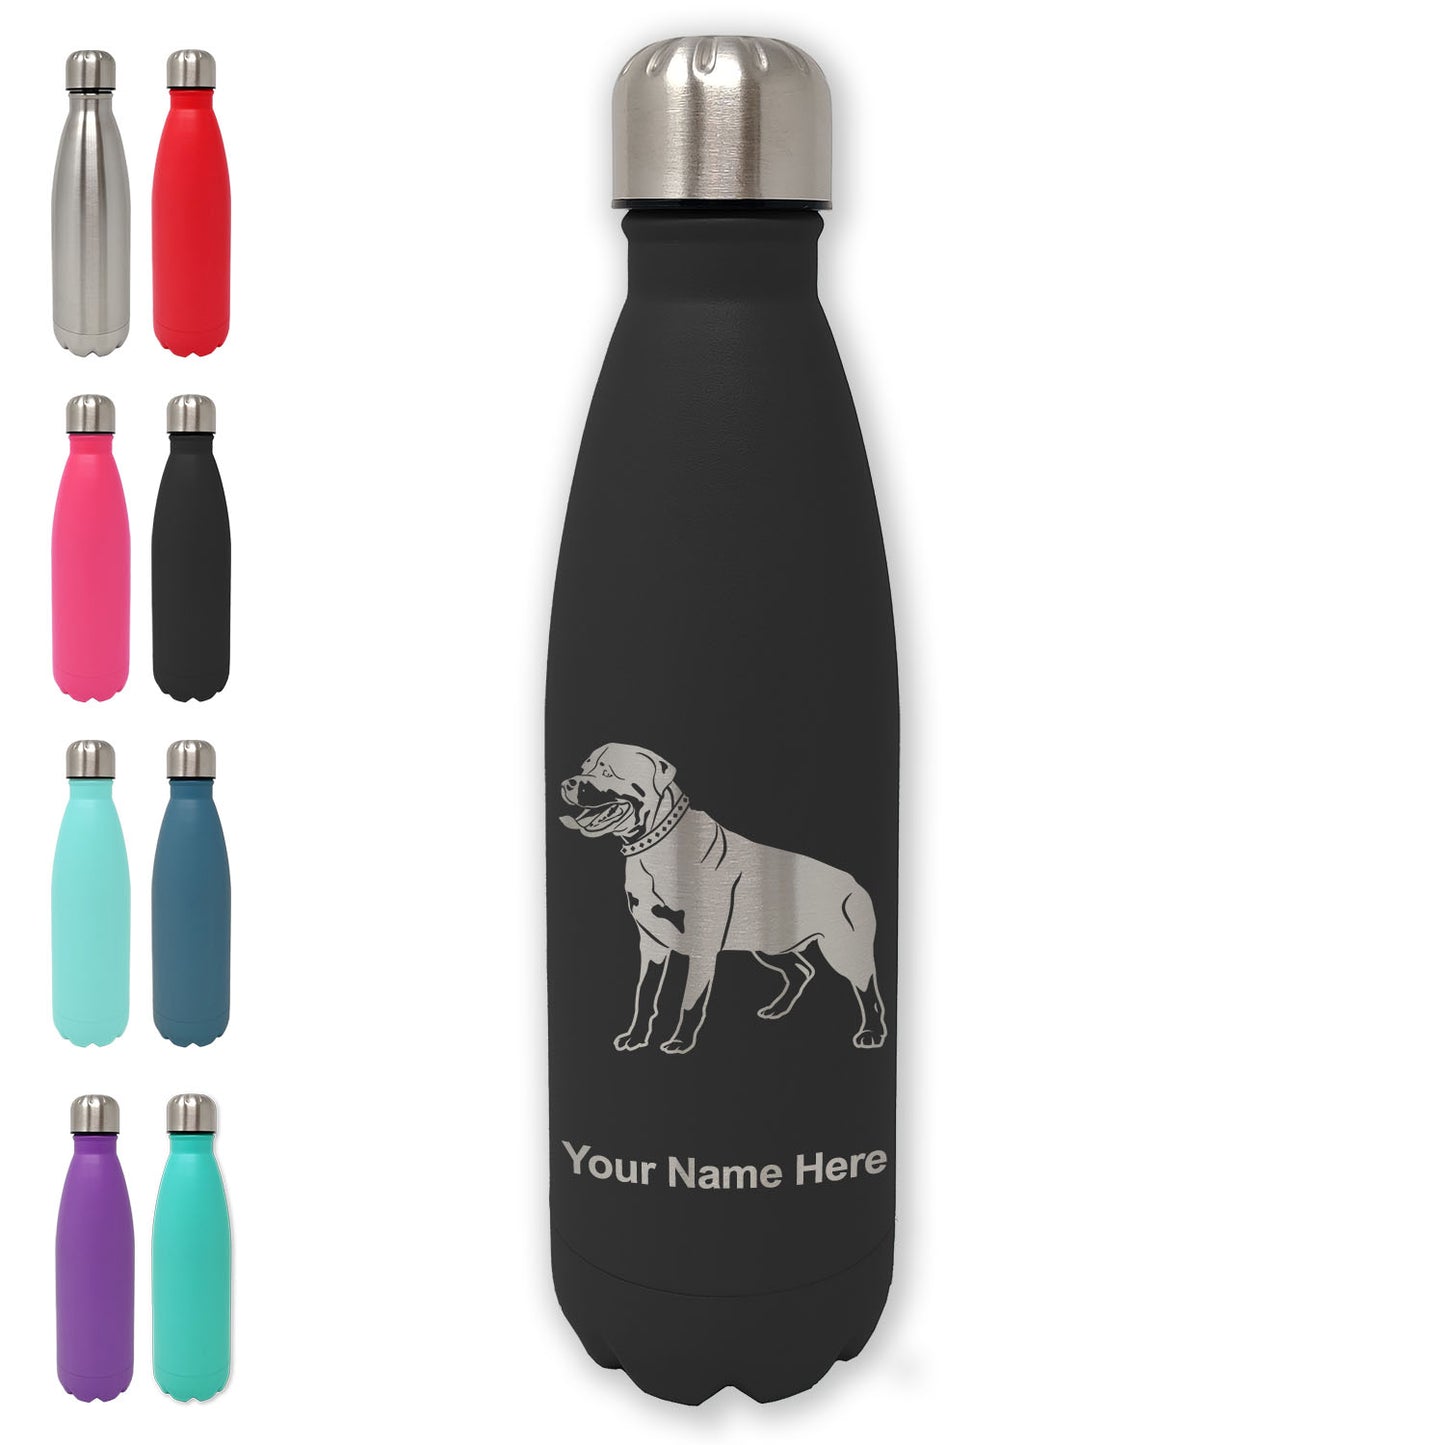 LaserGram Double Wall Water Bottle, Rottweiler Dog, Personalized Engraving Included